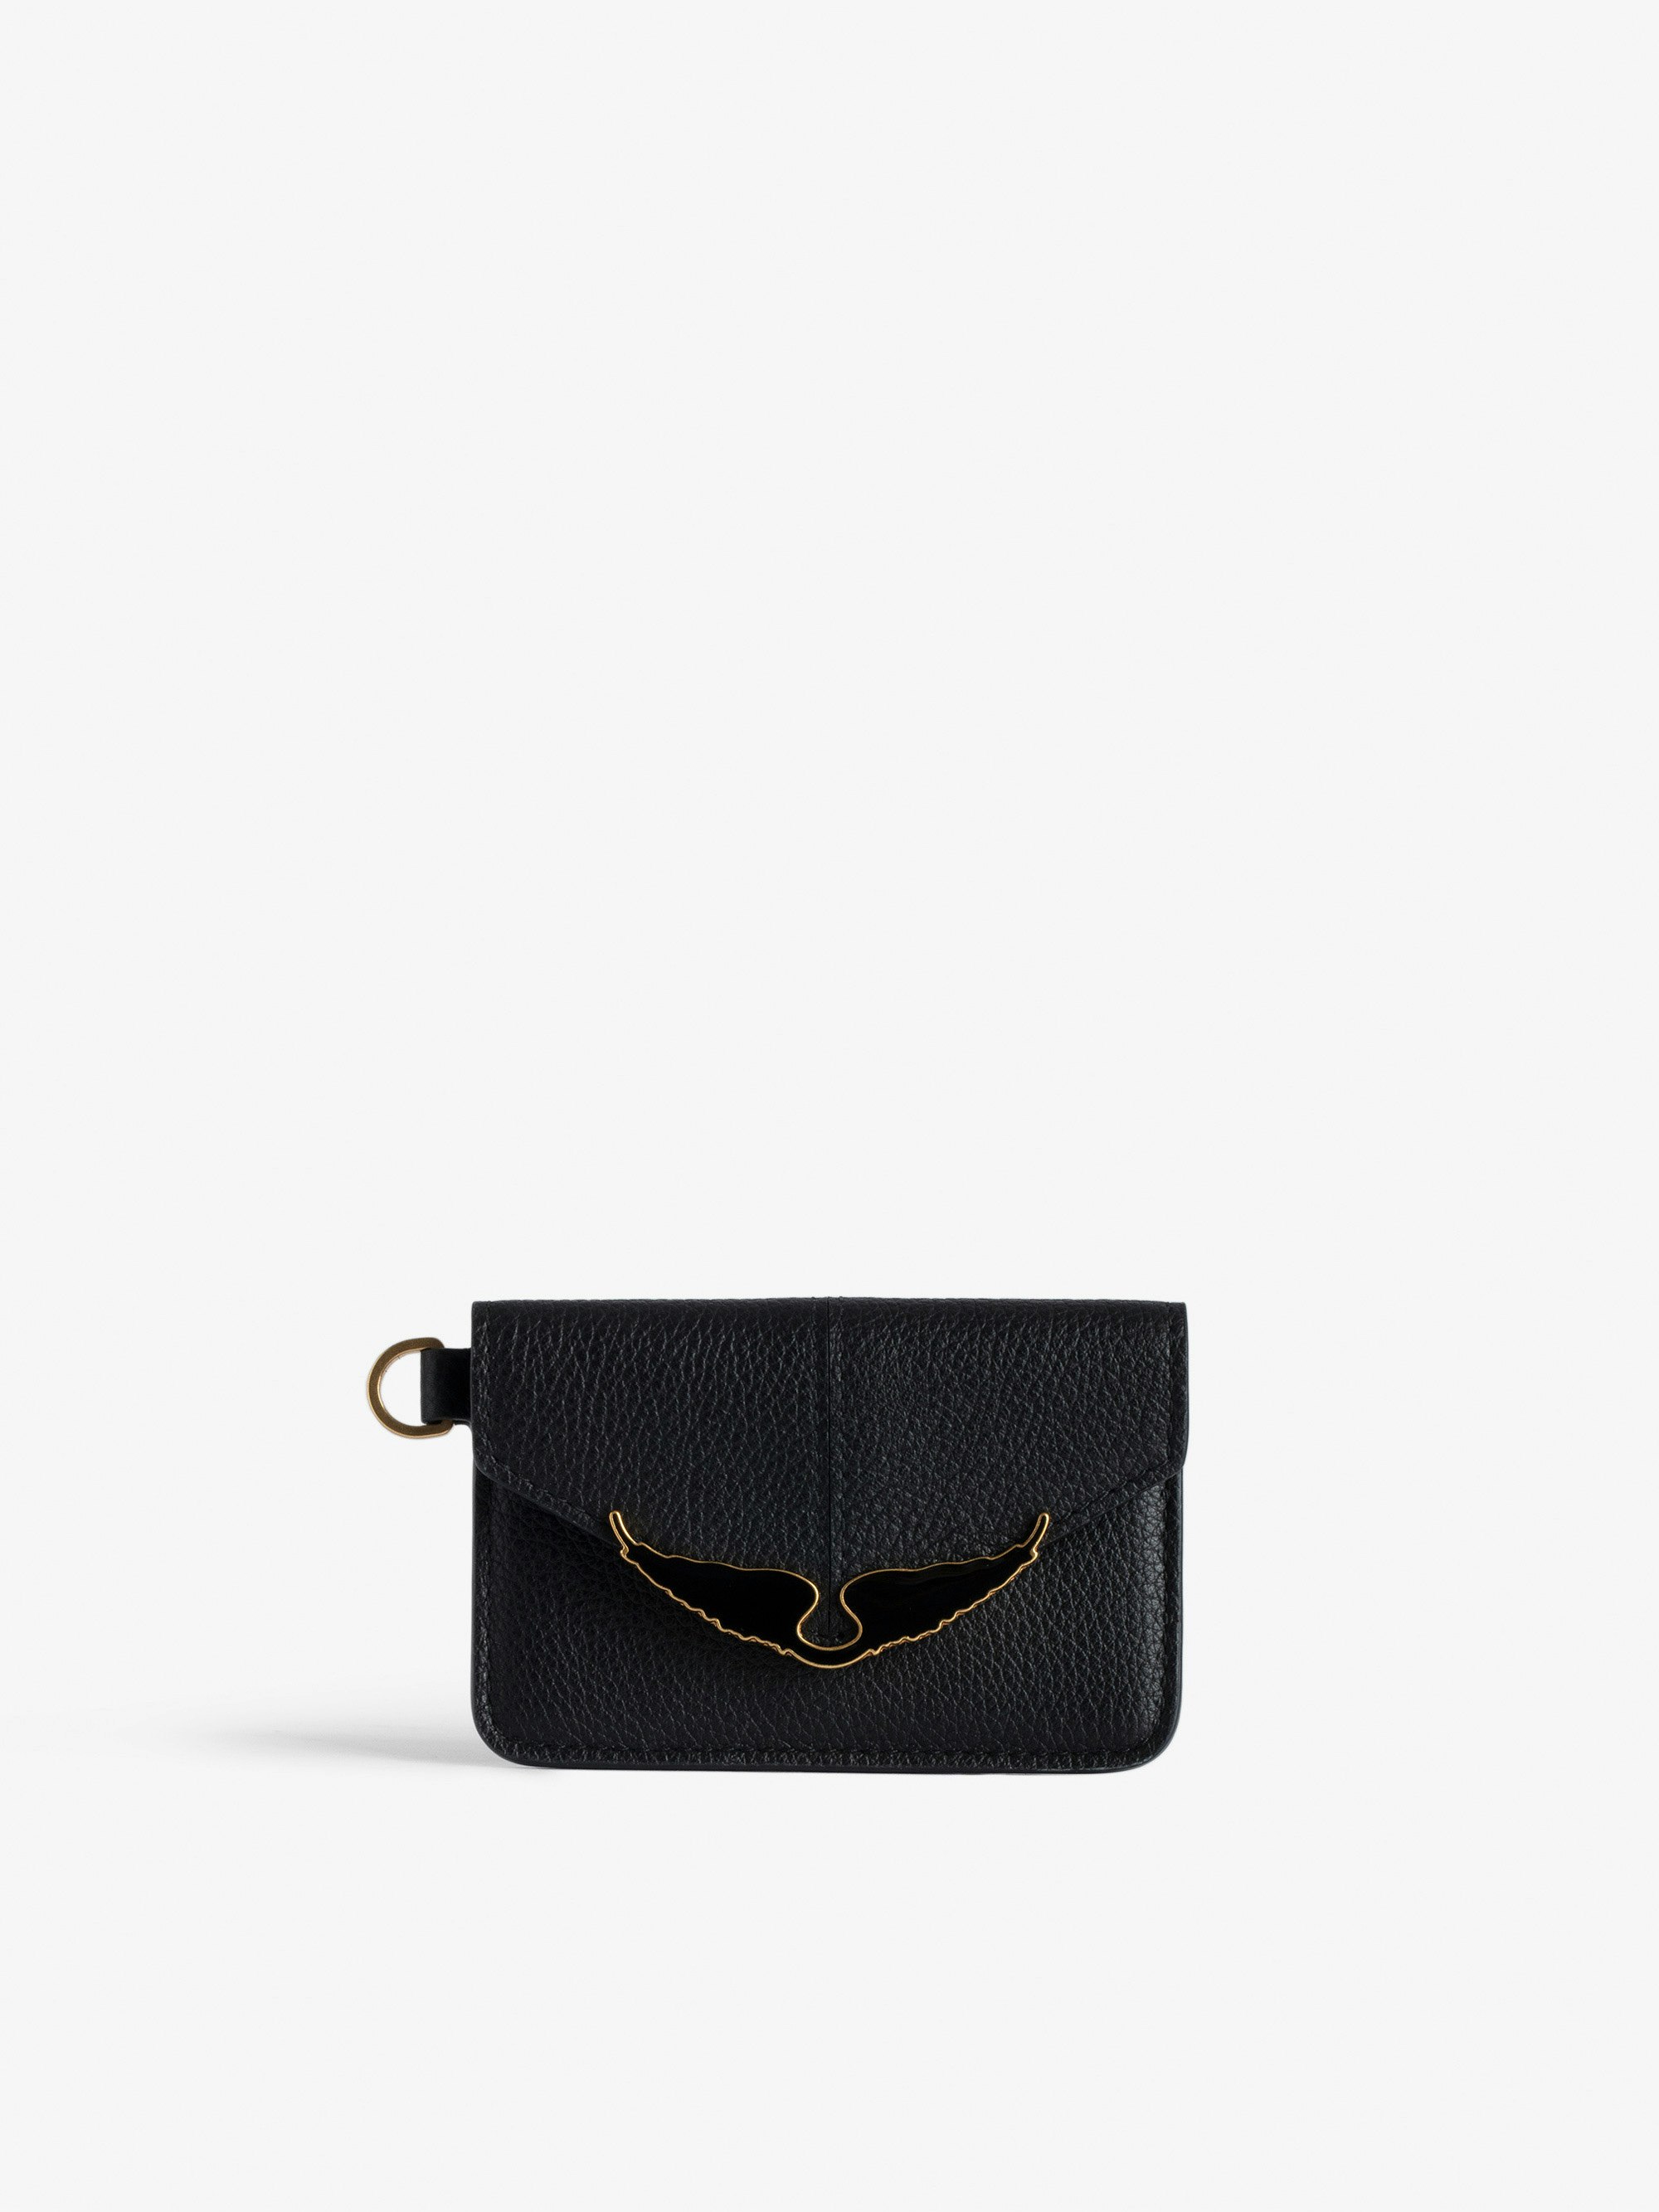 Borderline Pass Card Case - Women’s black grained patent leather envelope card holder with wings charm.